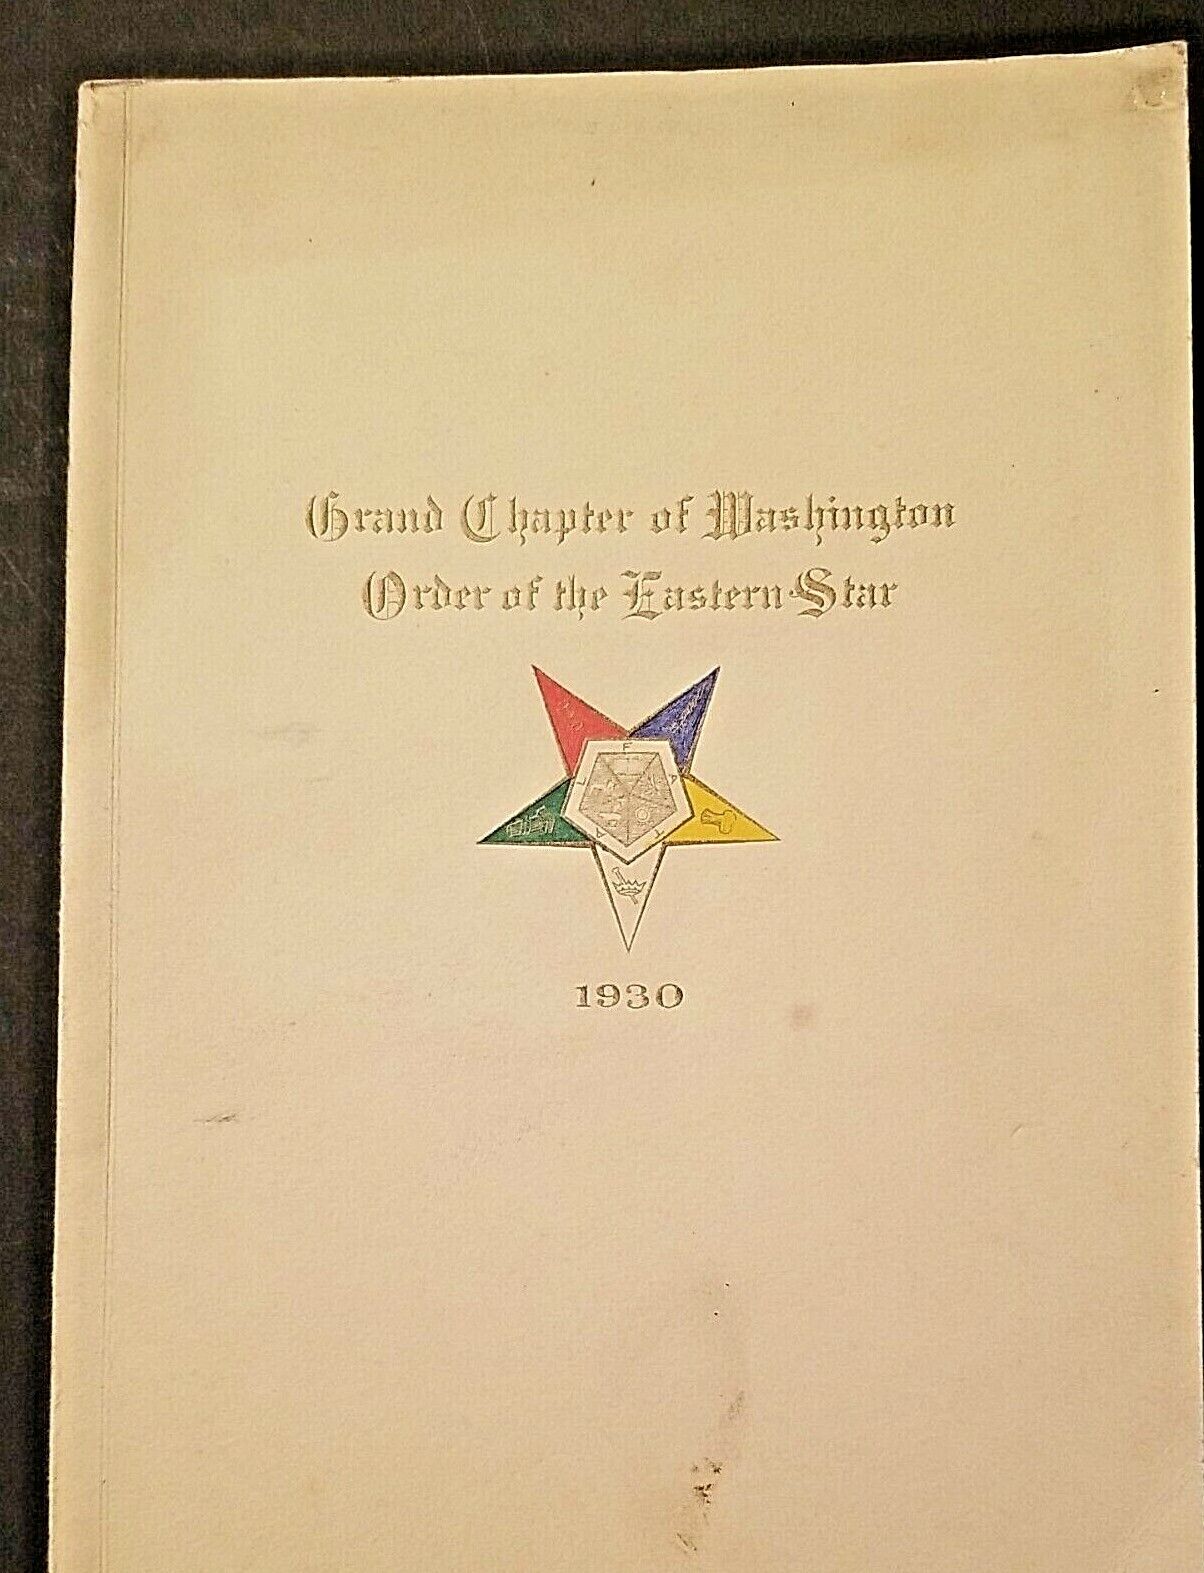 1930 GRAND CHAPTER of WASHINGTON Order of the Eastern Star 42nd Ses Proceedings 